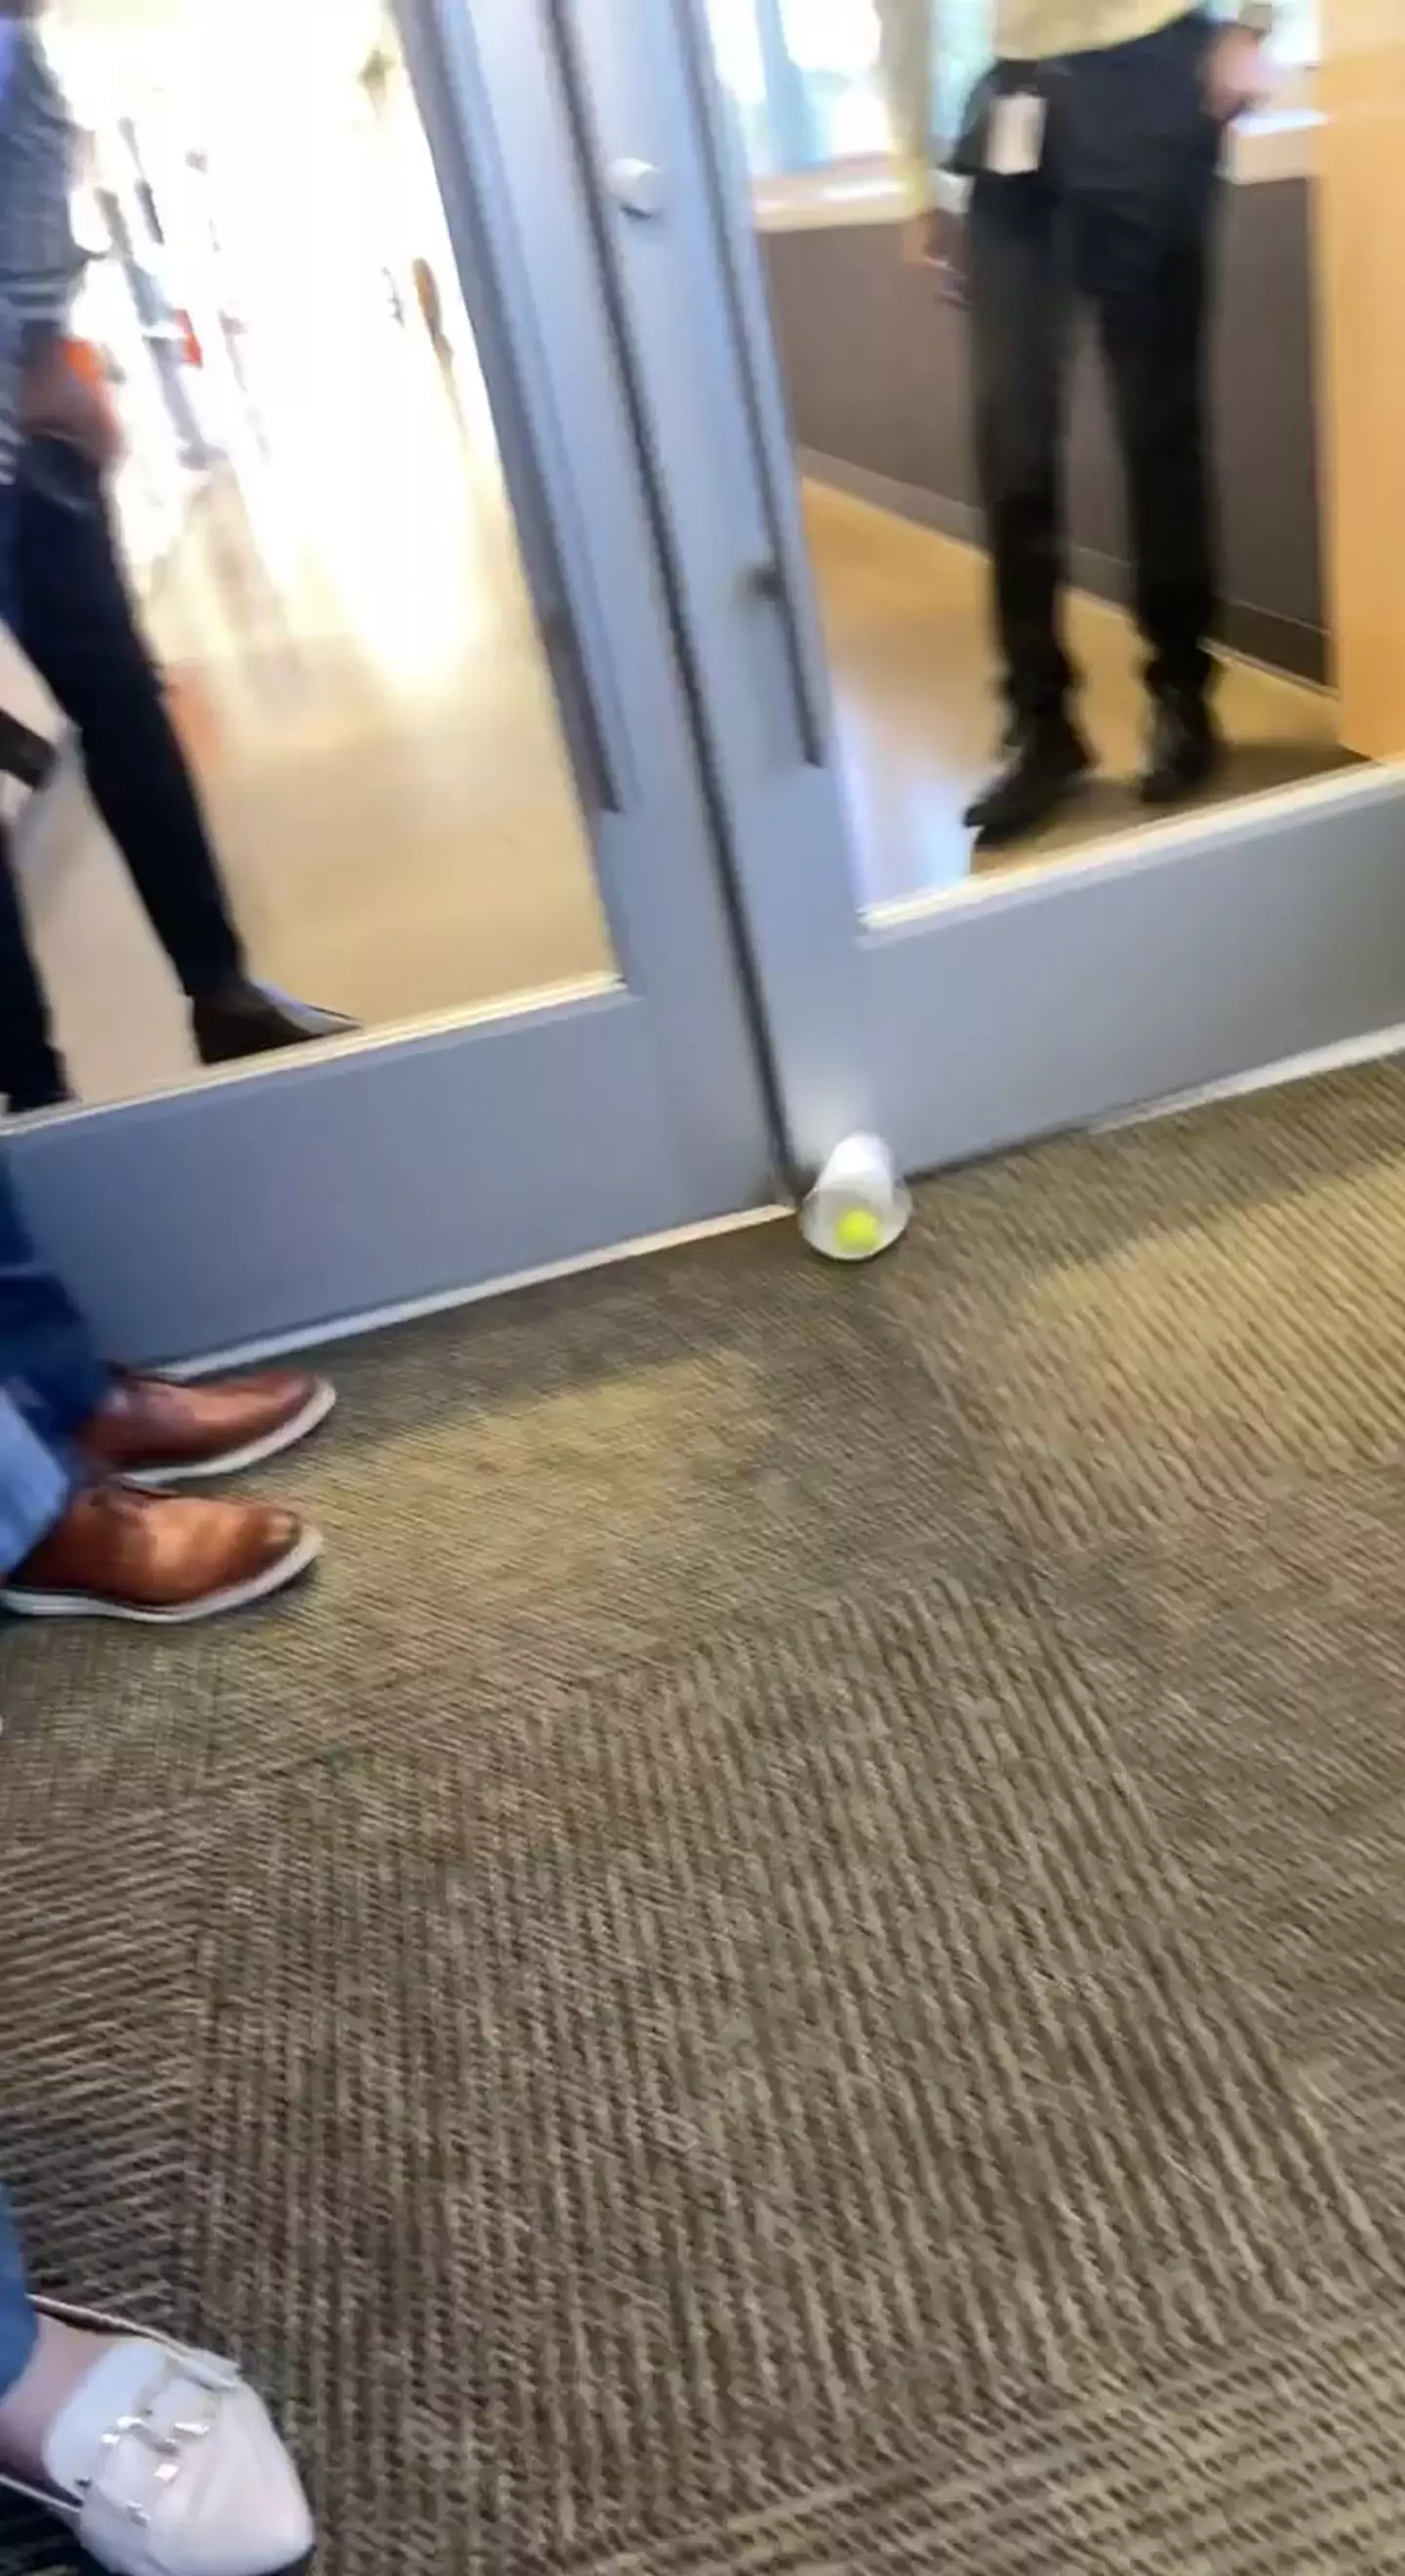 Employees were told they could leave three hours early if one of them hit the ball into the cup.